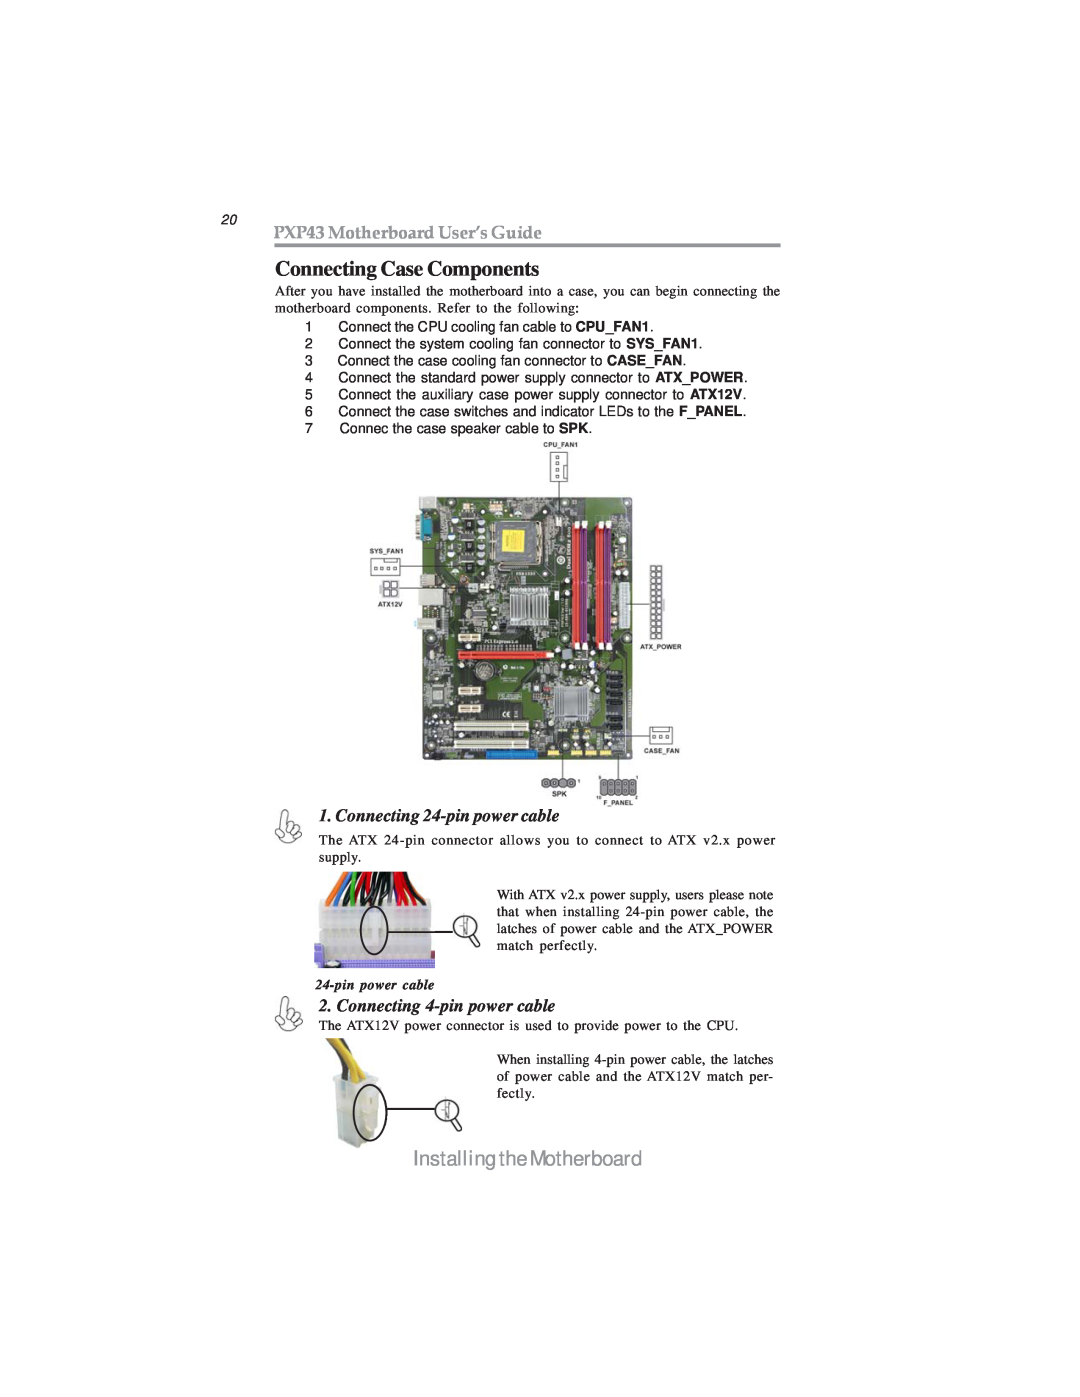 Microsoft manual Connecting Case Components, 20 PXP43 Motherboard User’s Guide, Connecting 24-pin power cable 